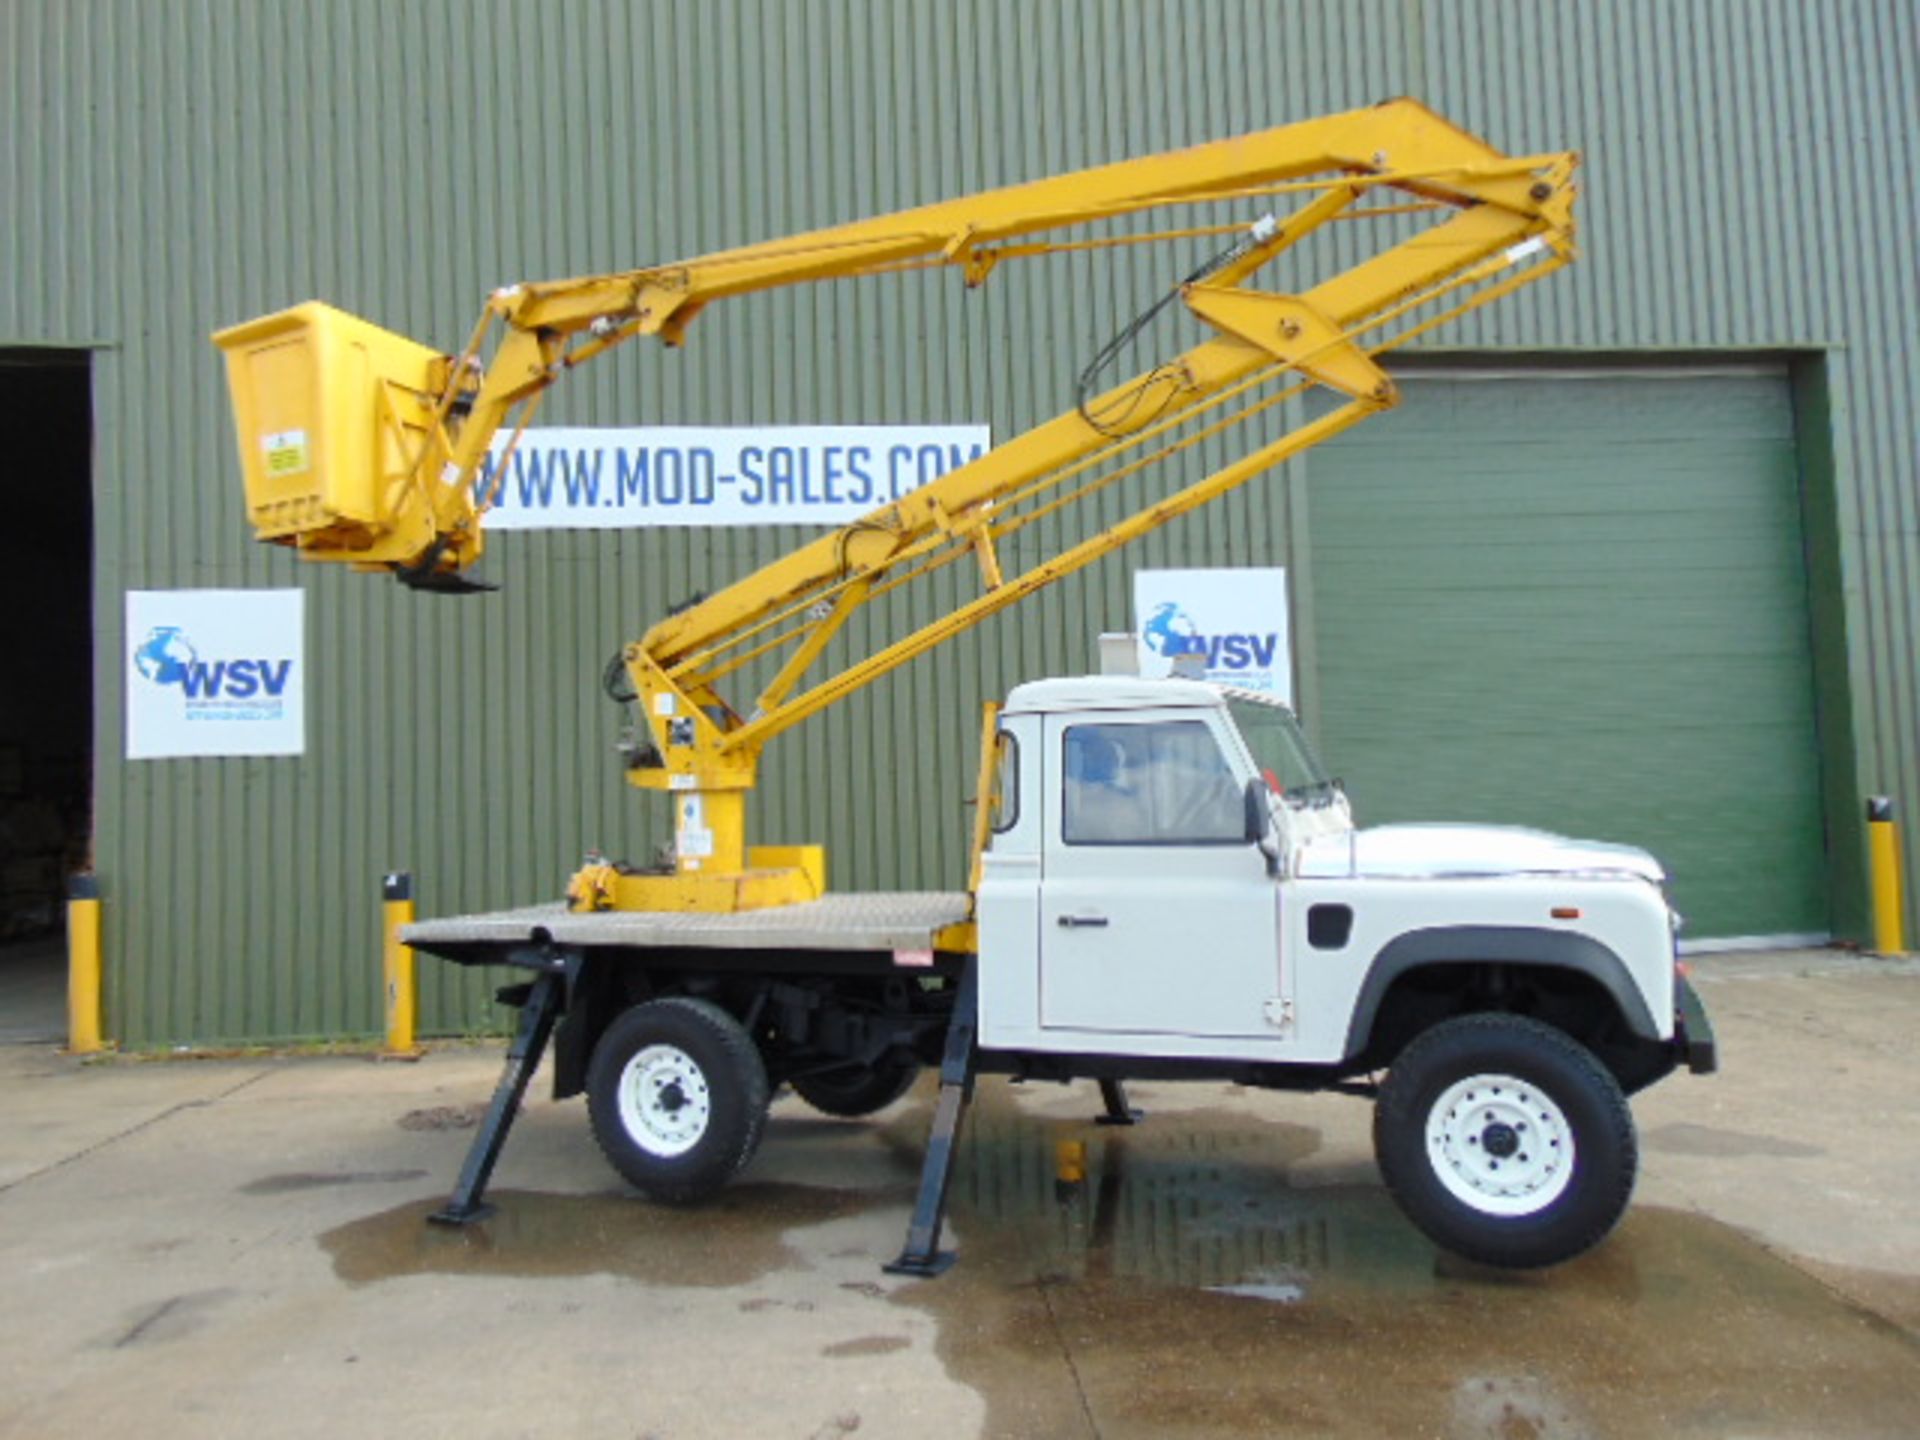 2010 Land Rover Defender 130 2.4 Puma Cherry Picker / Access Lift ONLY 83,760 MILES!